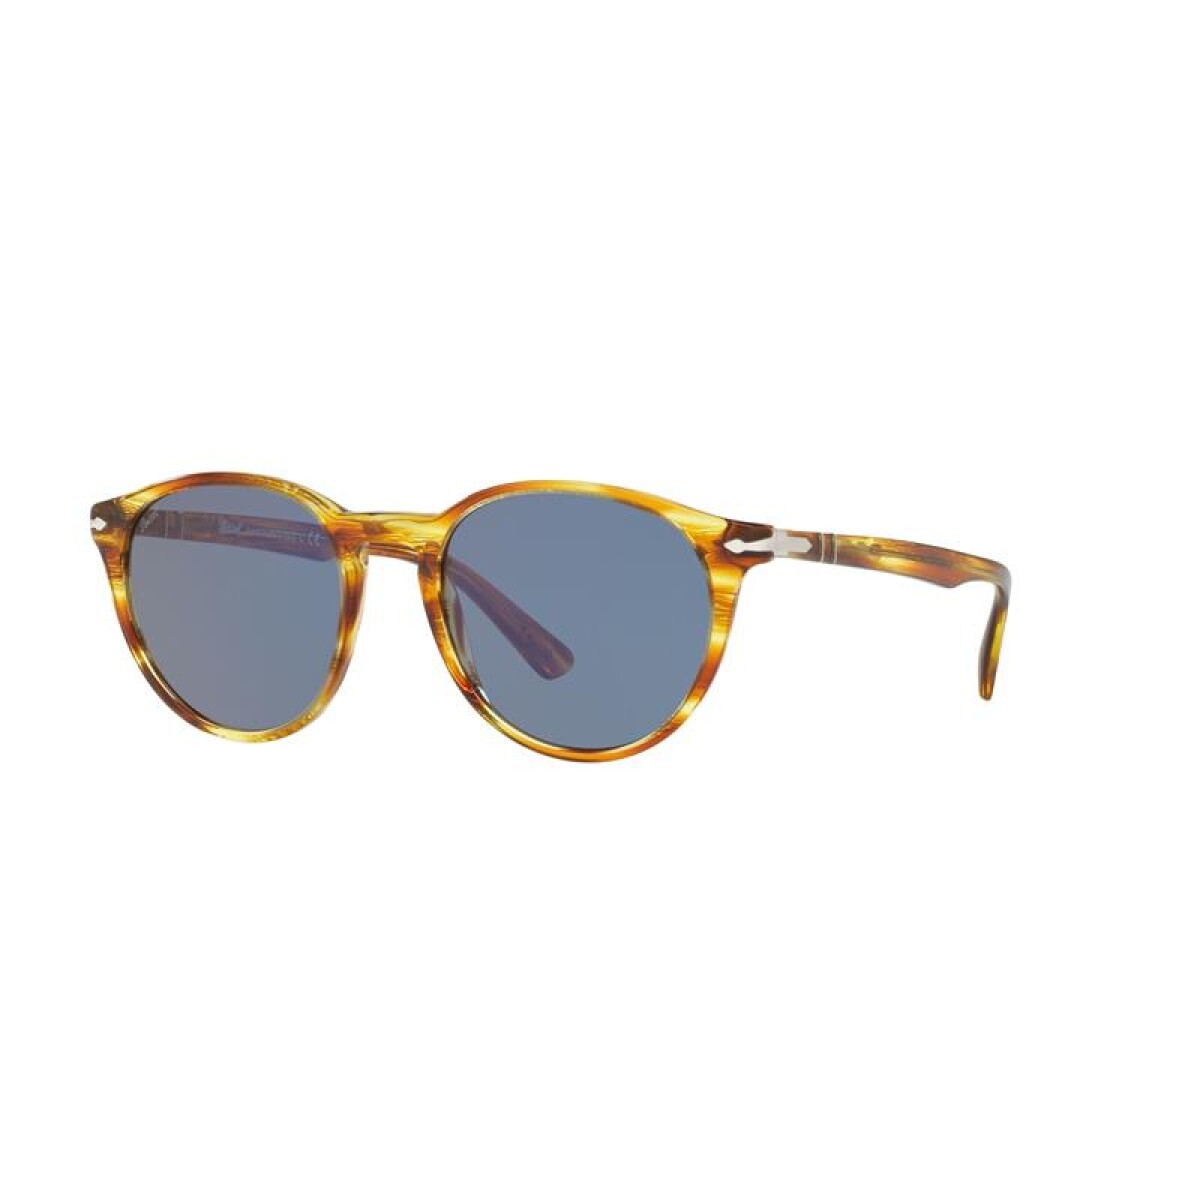 Persol 3152-s - 9043/56 